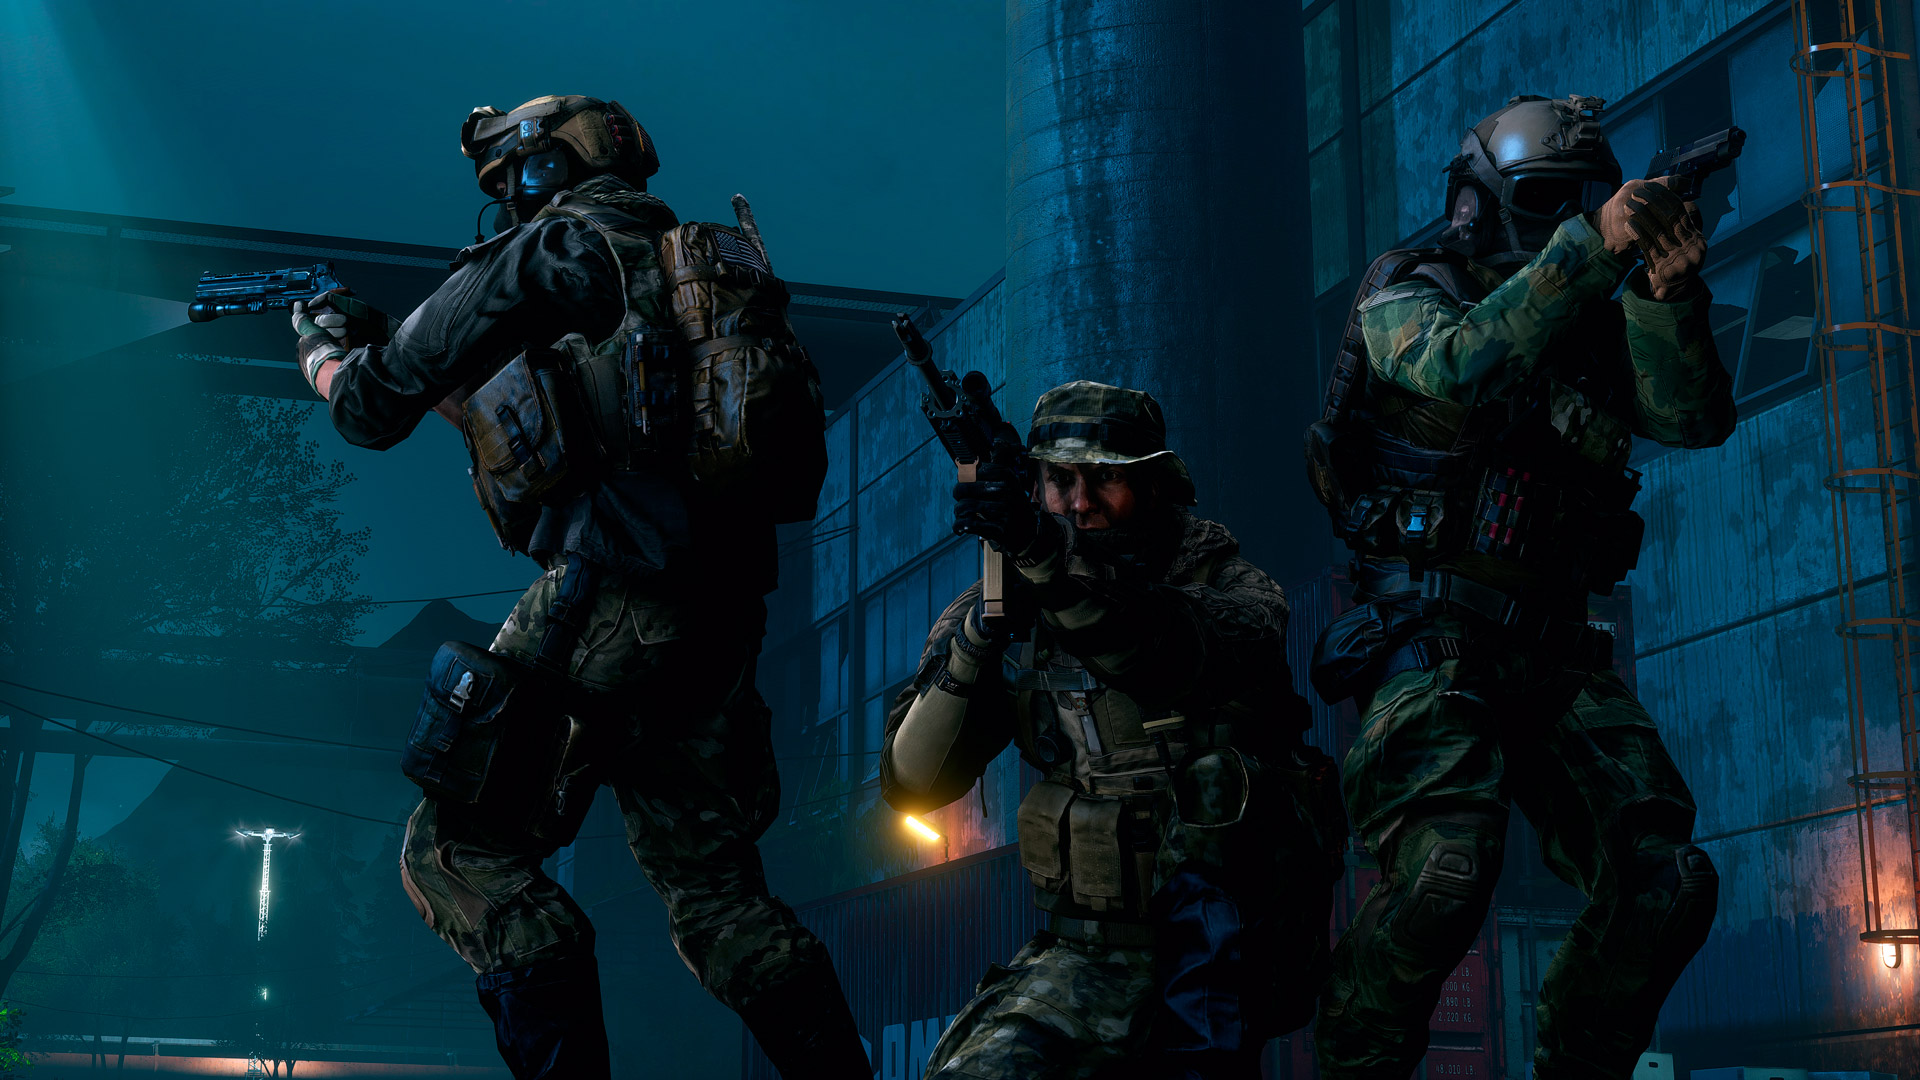 Battlefield 4 Legacy Operations Details A New Map